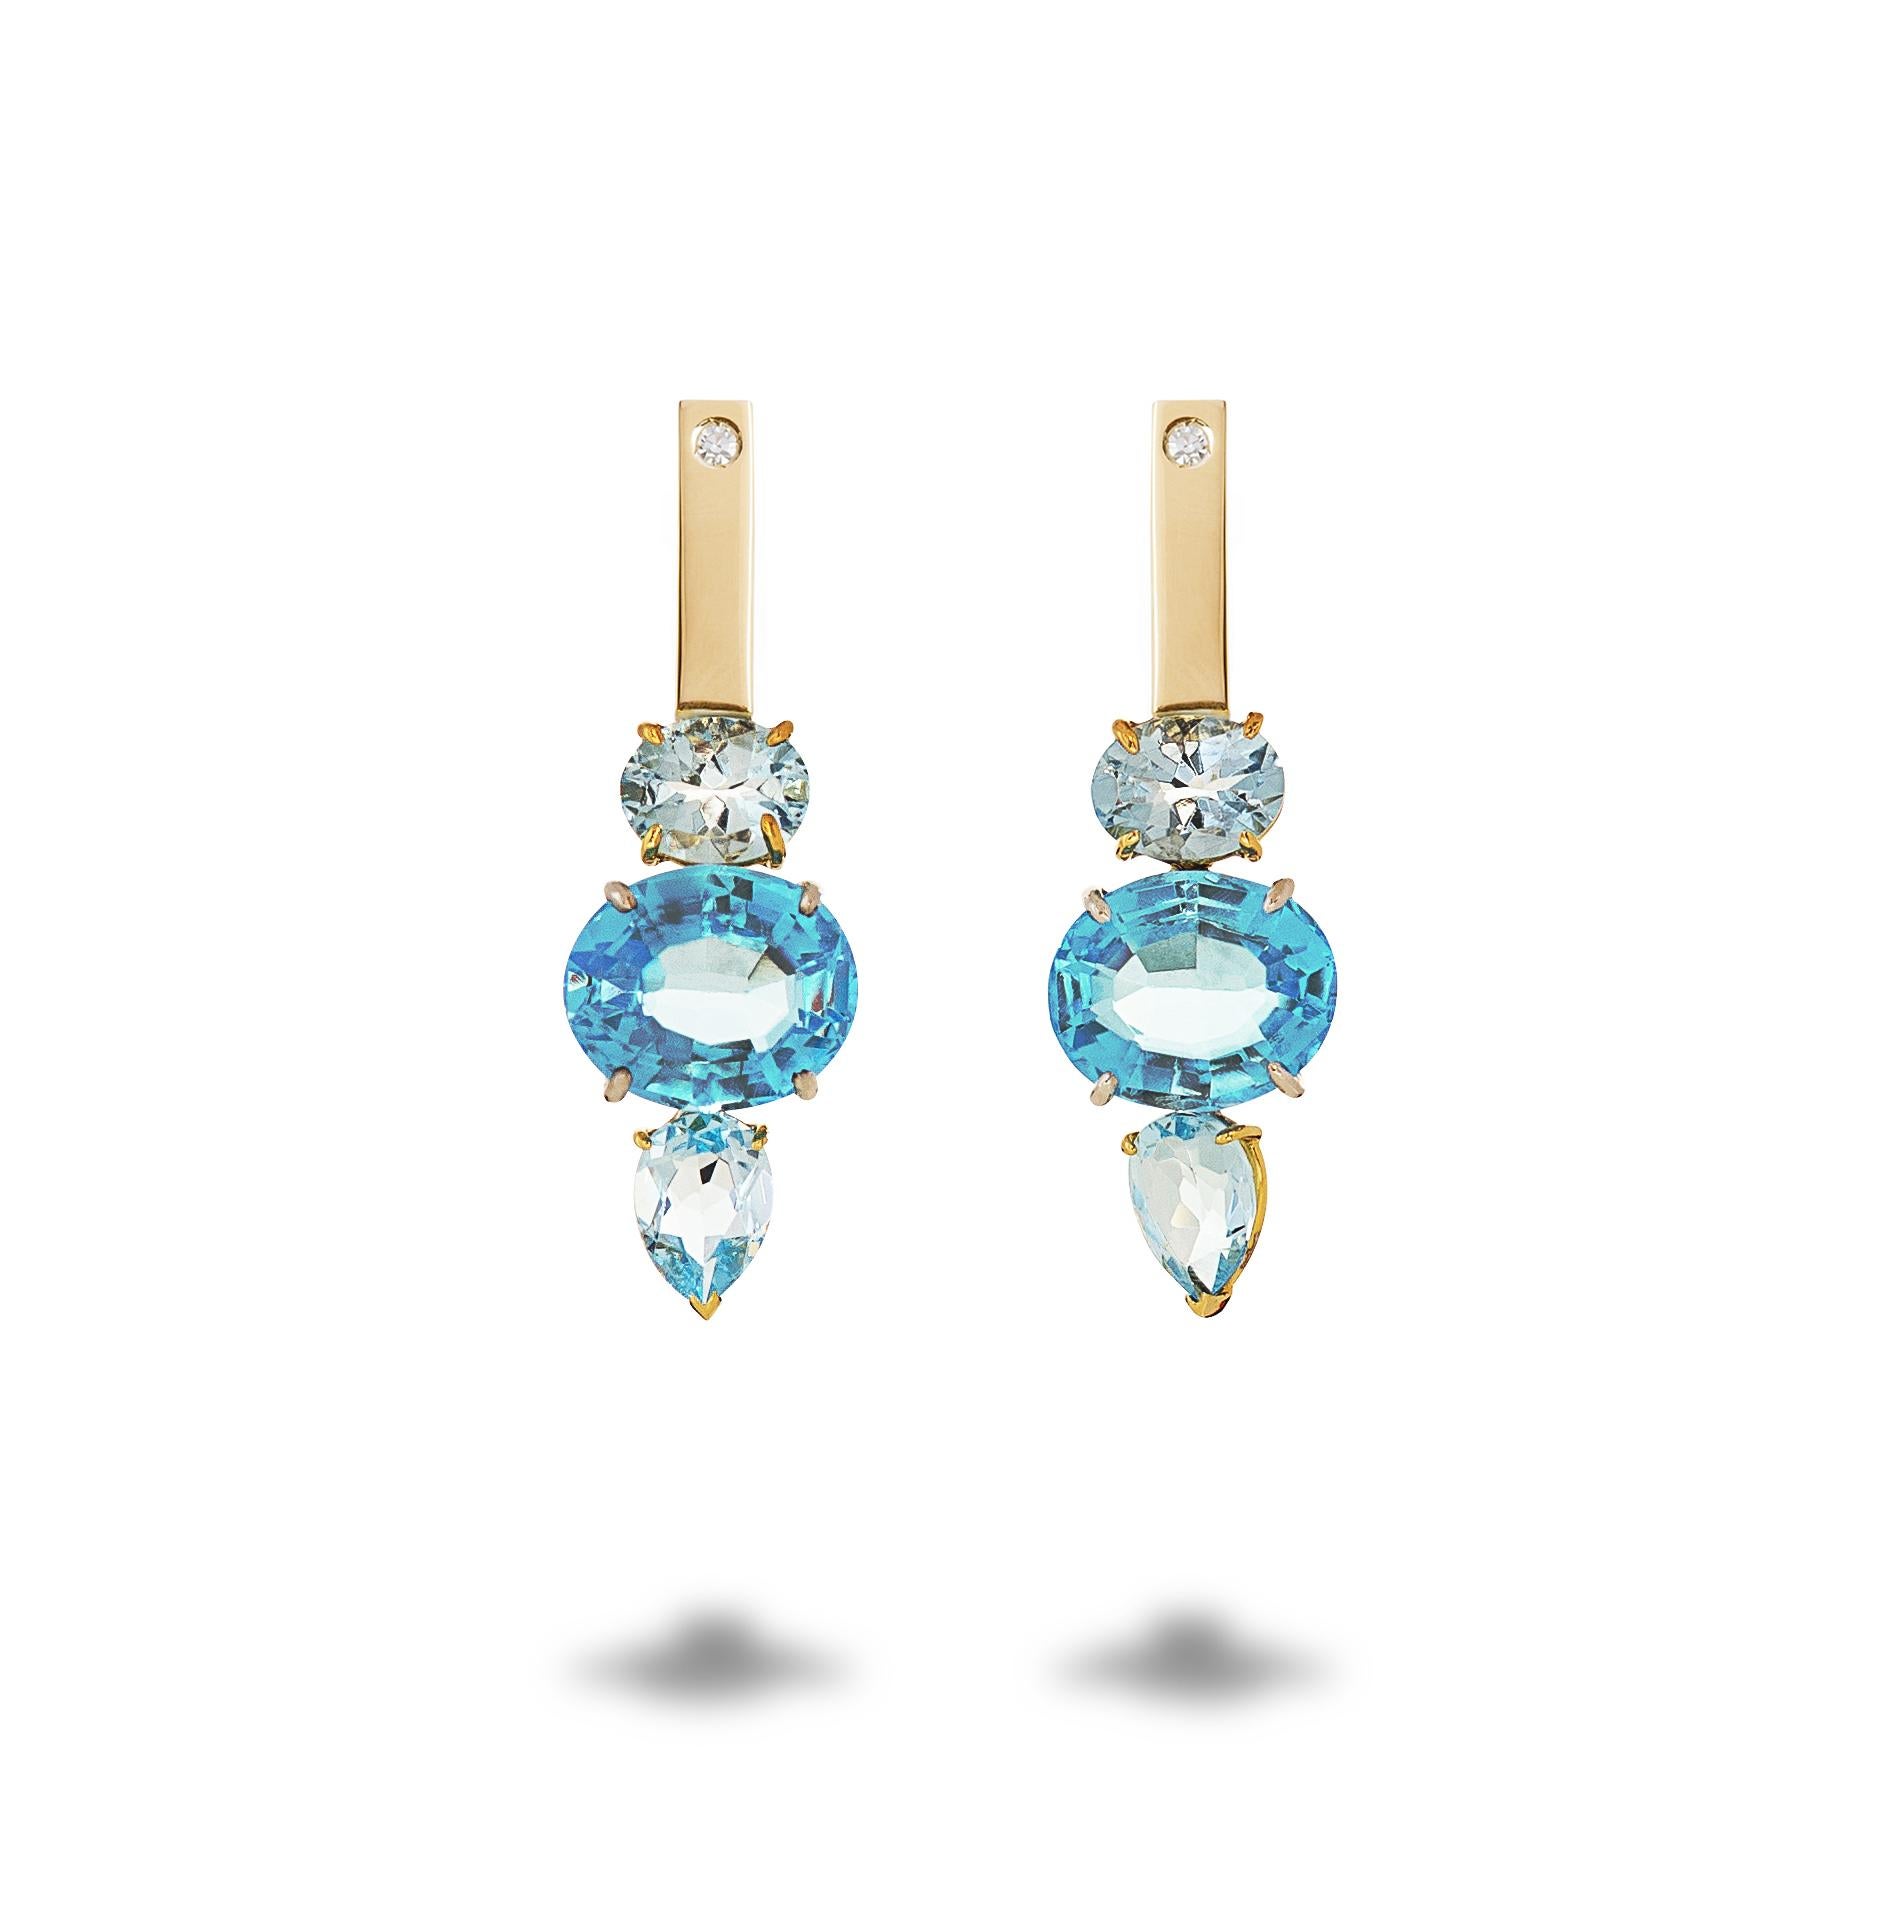  18 Karat Yellow&White Gold Blue Topaz 0.16 Karat White Diamonds Earrings
These earrings reminds of a dip in the ocean. The colour of the topaz is like the light blue of the clean water and the white diamonds are like the sea foam. Definitely for